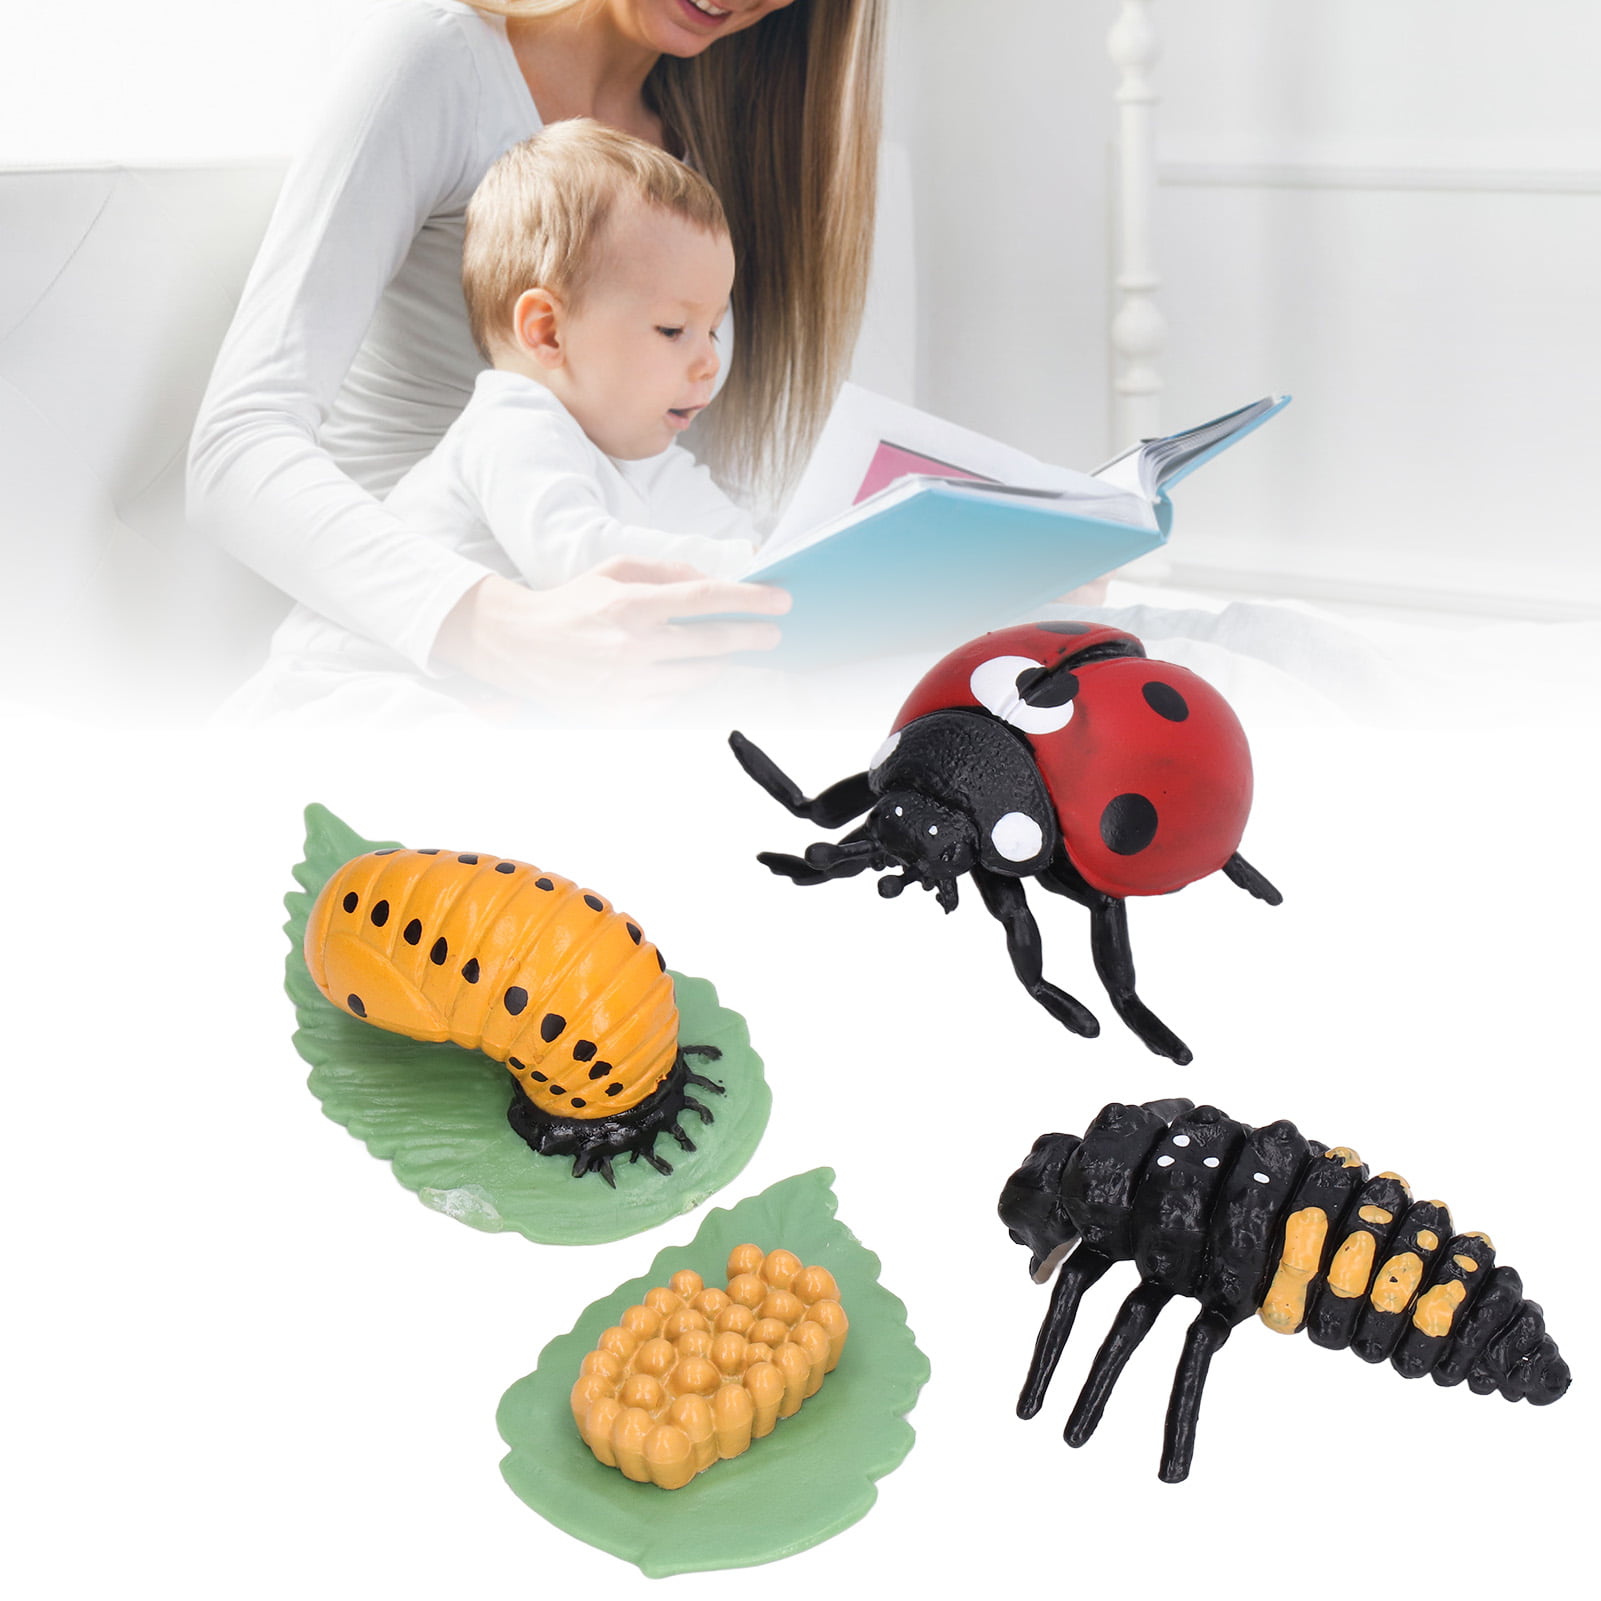 Insect growth Playset Devilfish Life Cycle Set Model Toy figures Learning & 